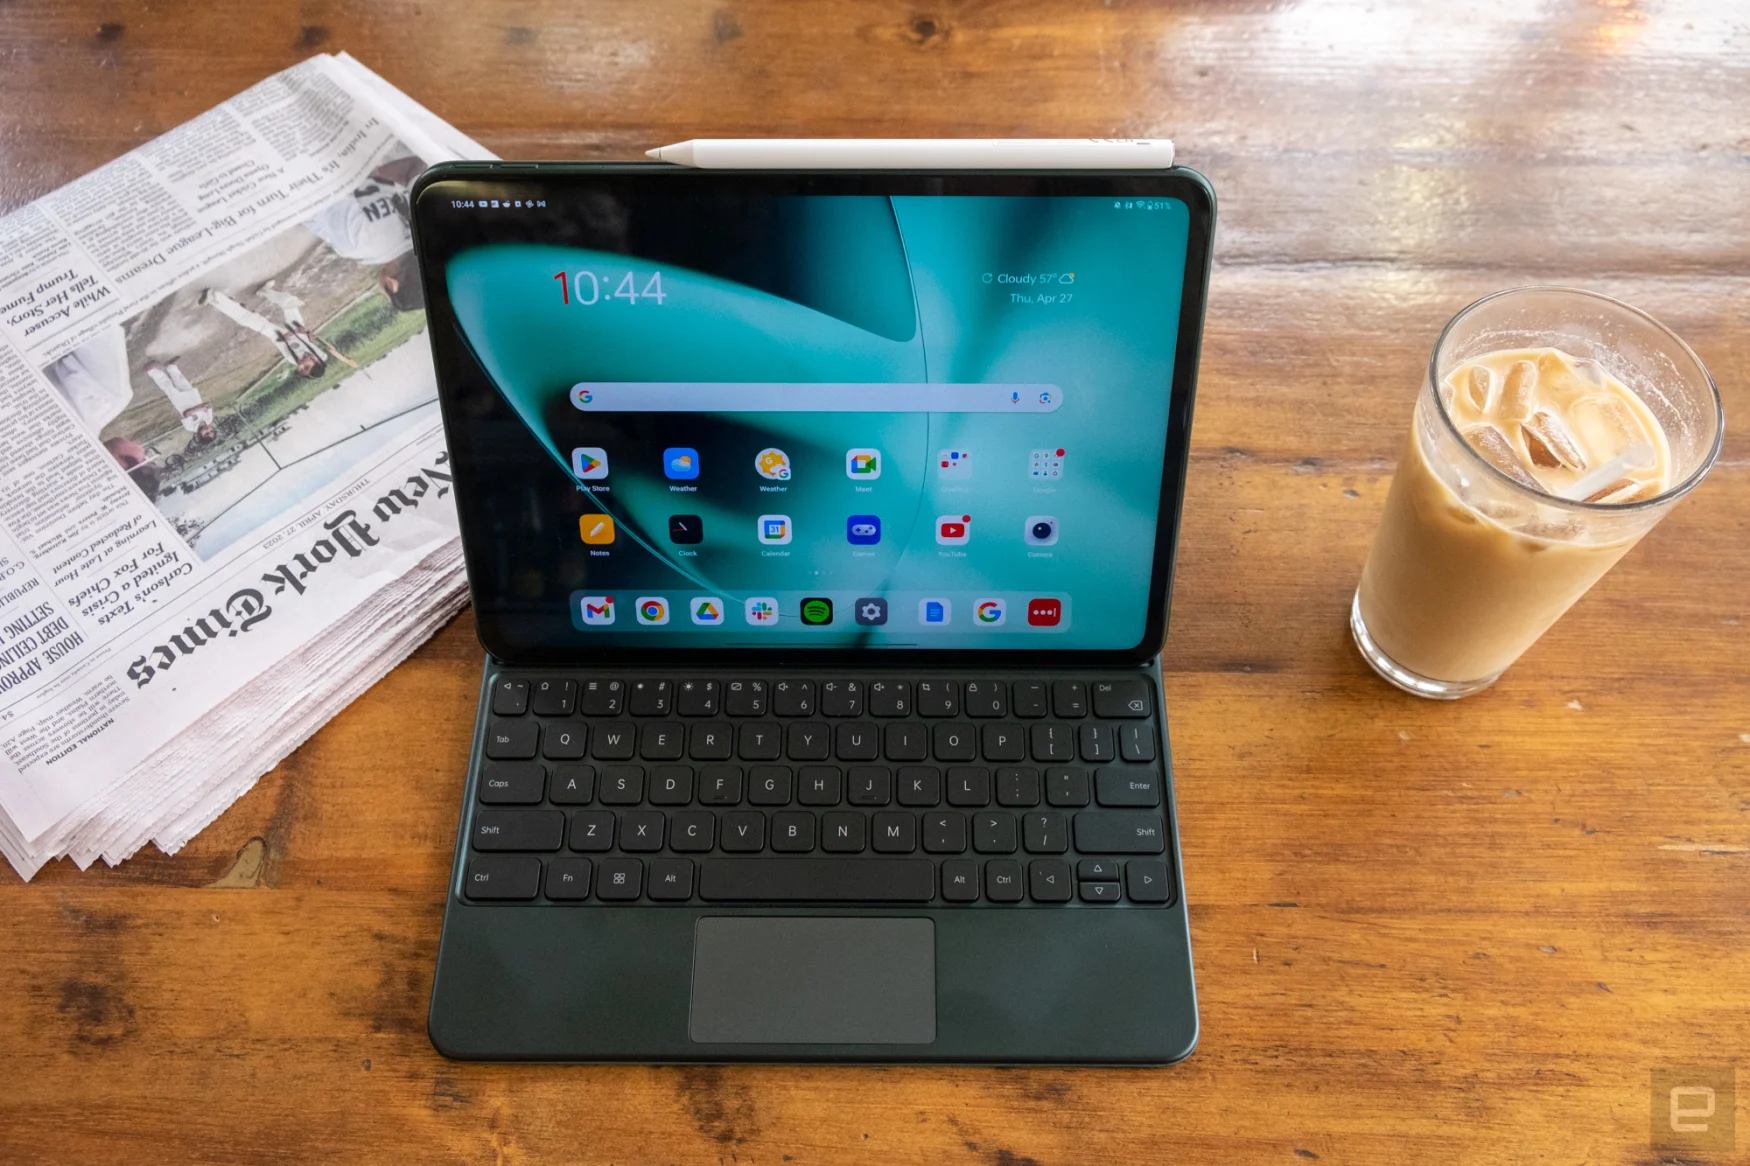 Photos of the OnePlus Pad tablet and its keyboard folio and Stylo pen accessories.